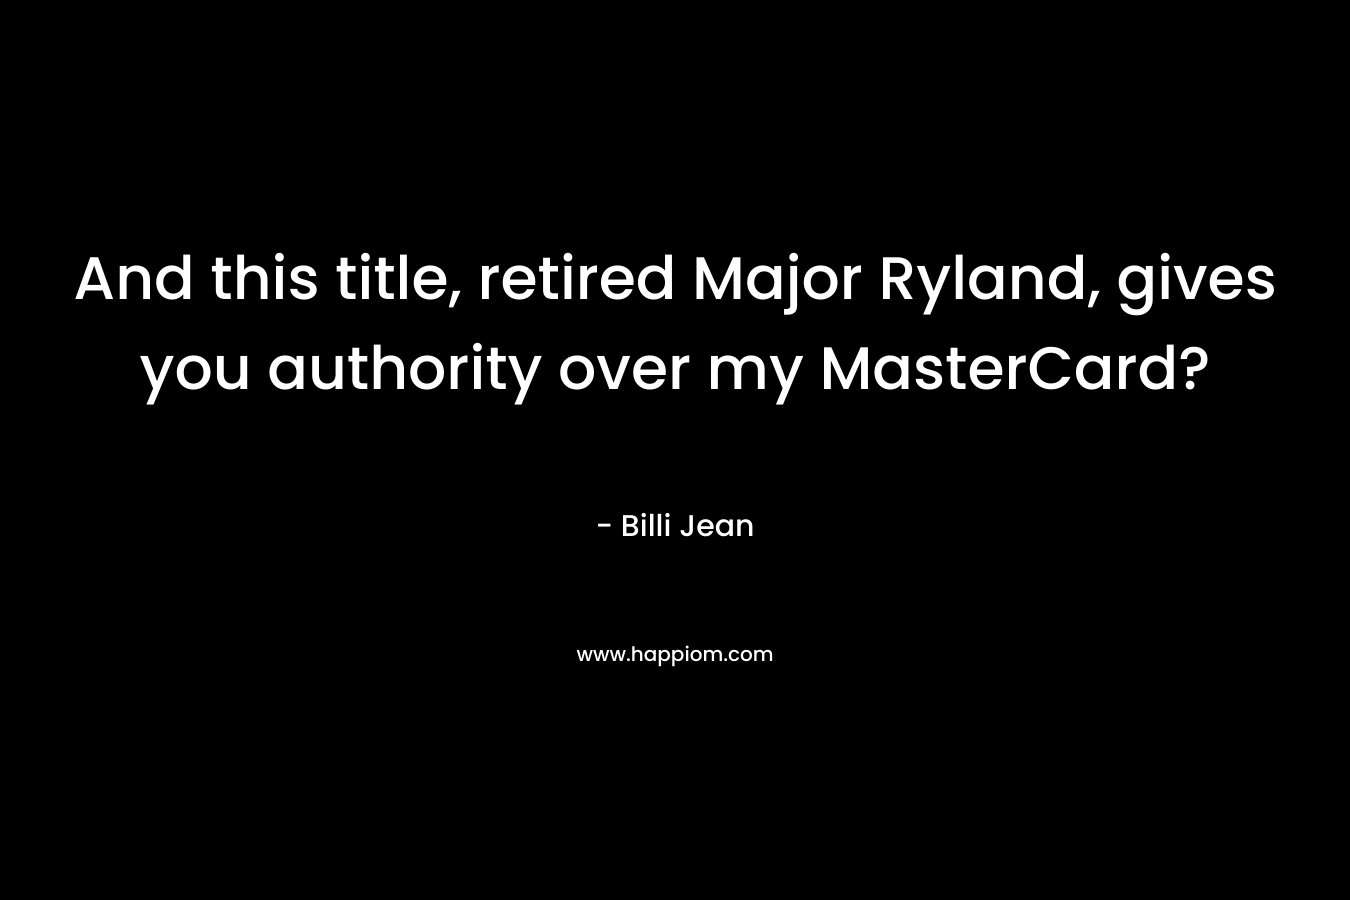 And this title, retired Major Ryland, gives you authority over my MasterCard? – Billi Jean